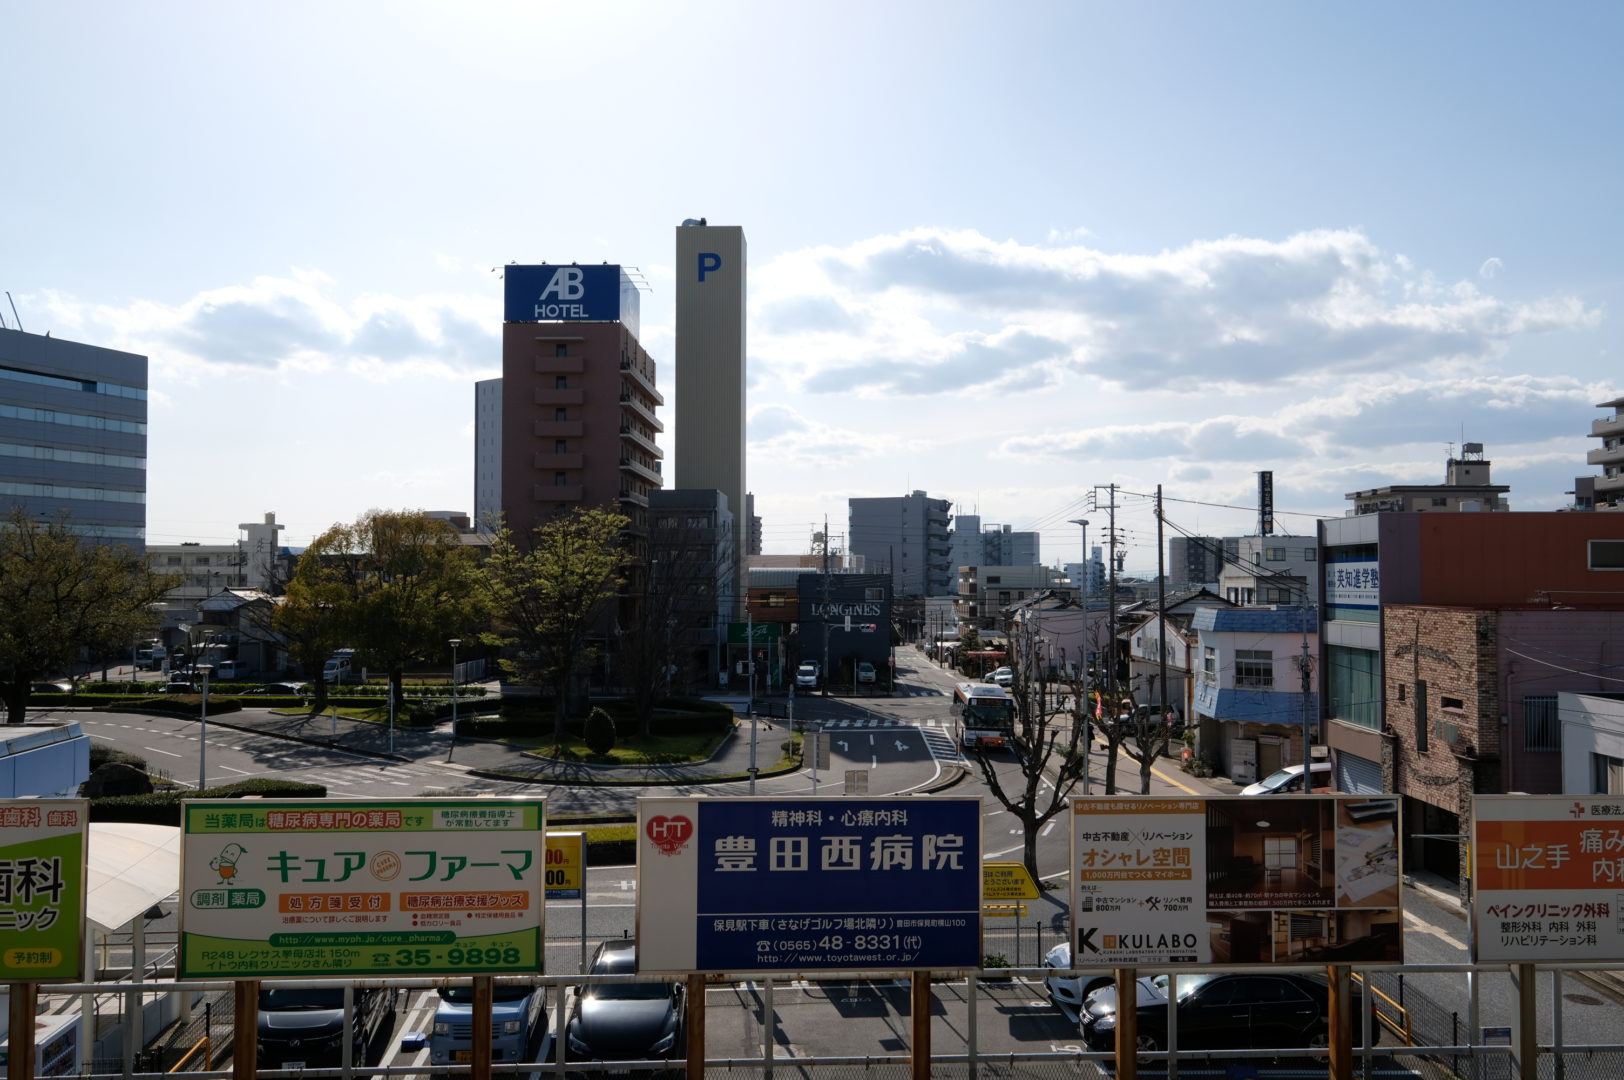 A view of Toyota City from the Mikawa-Toyota train station platform